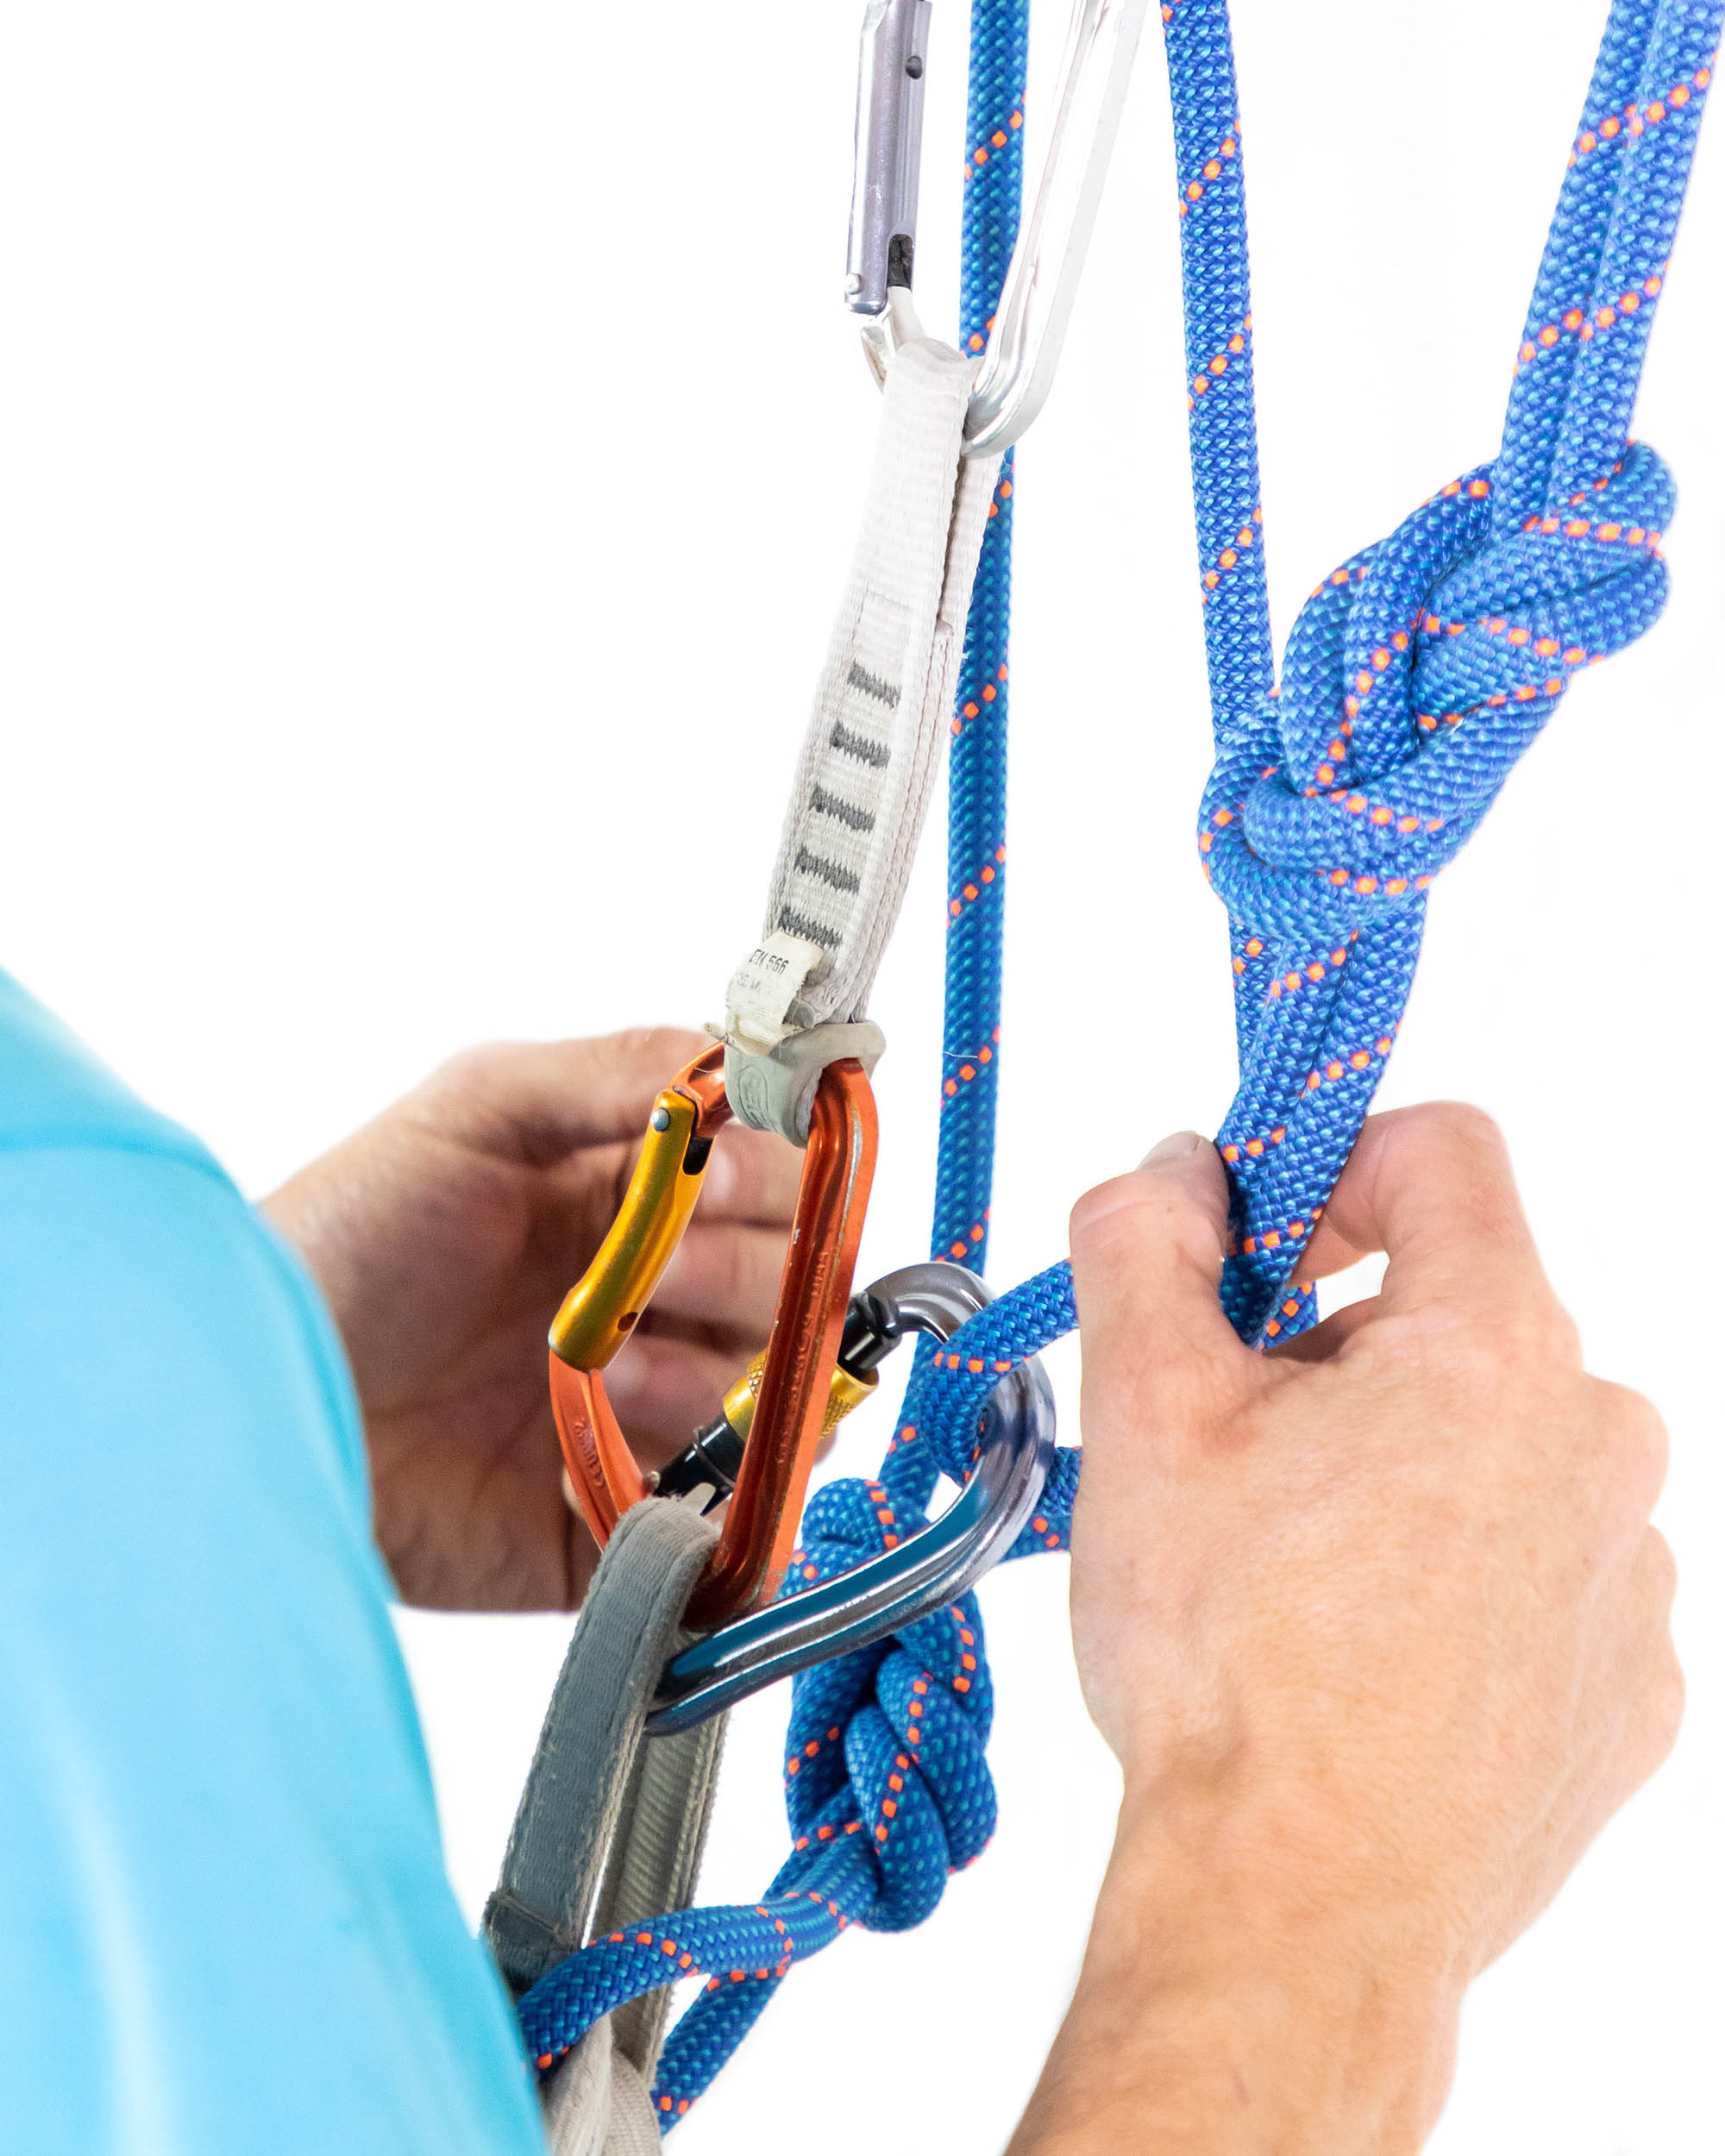 figure 8 knot clipped to belay loop